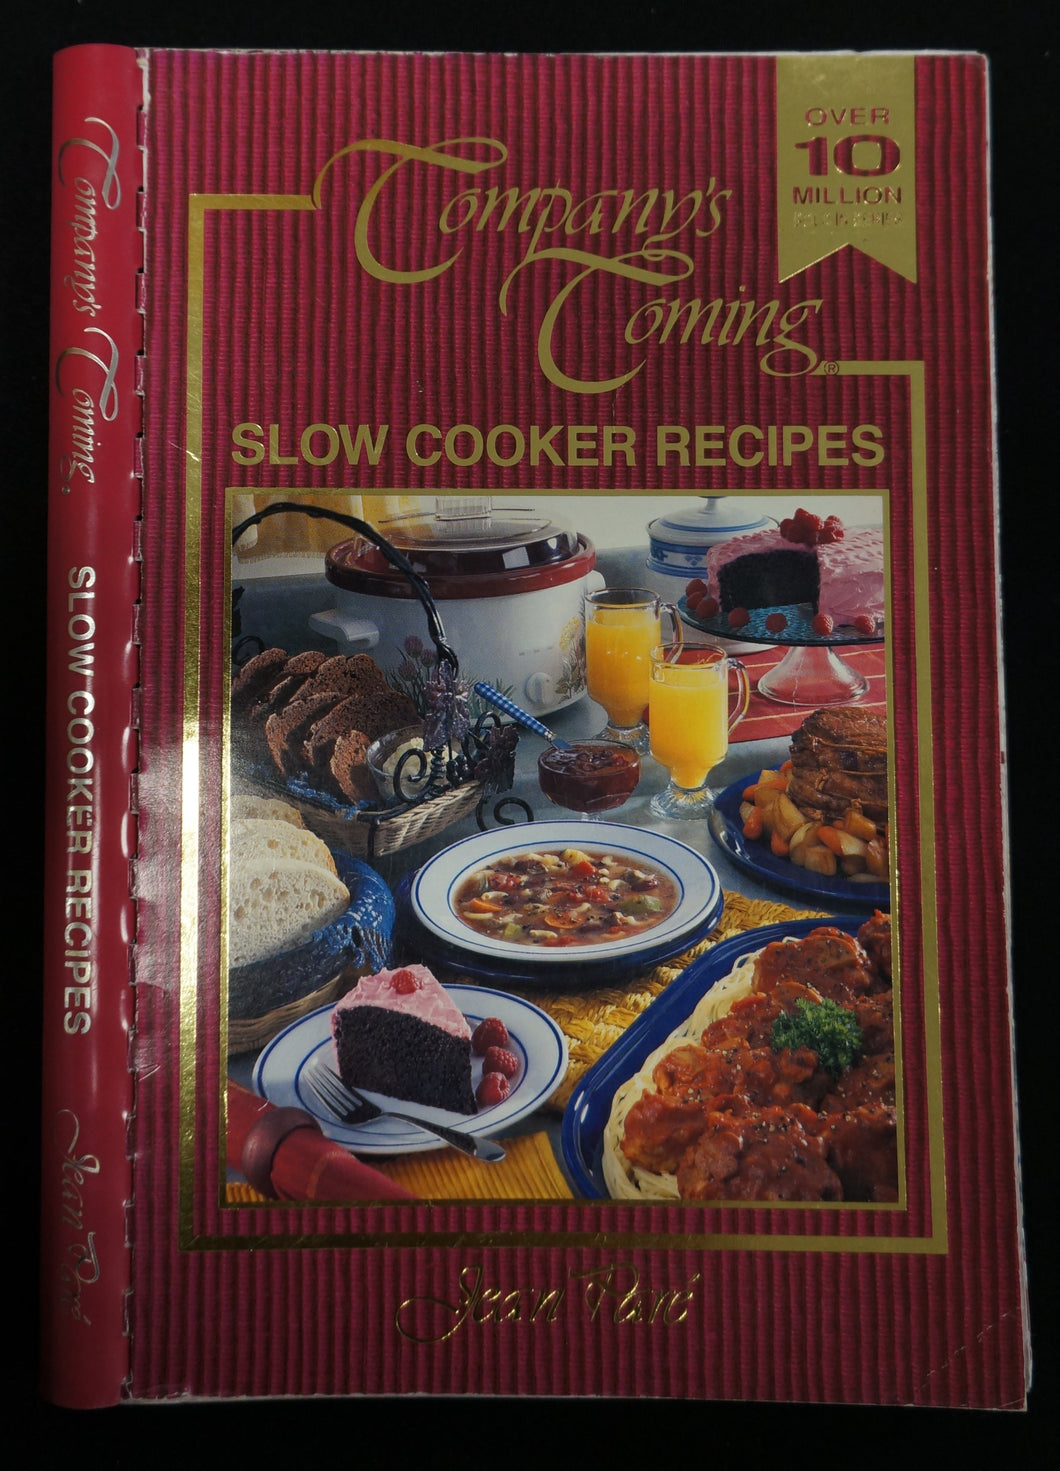 Company's Coming - Slow Cooker Recipes